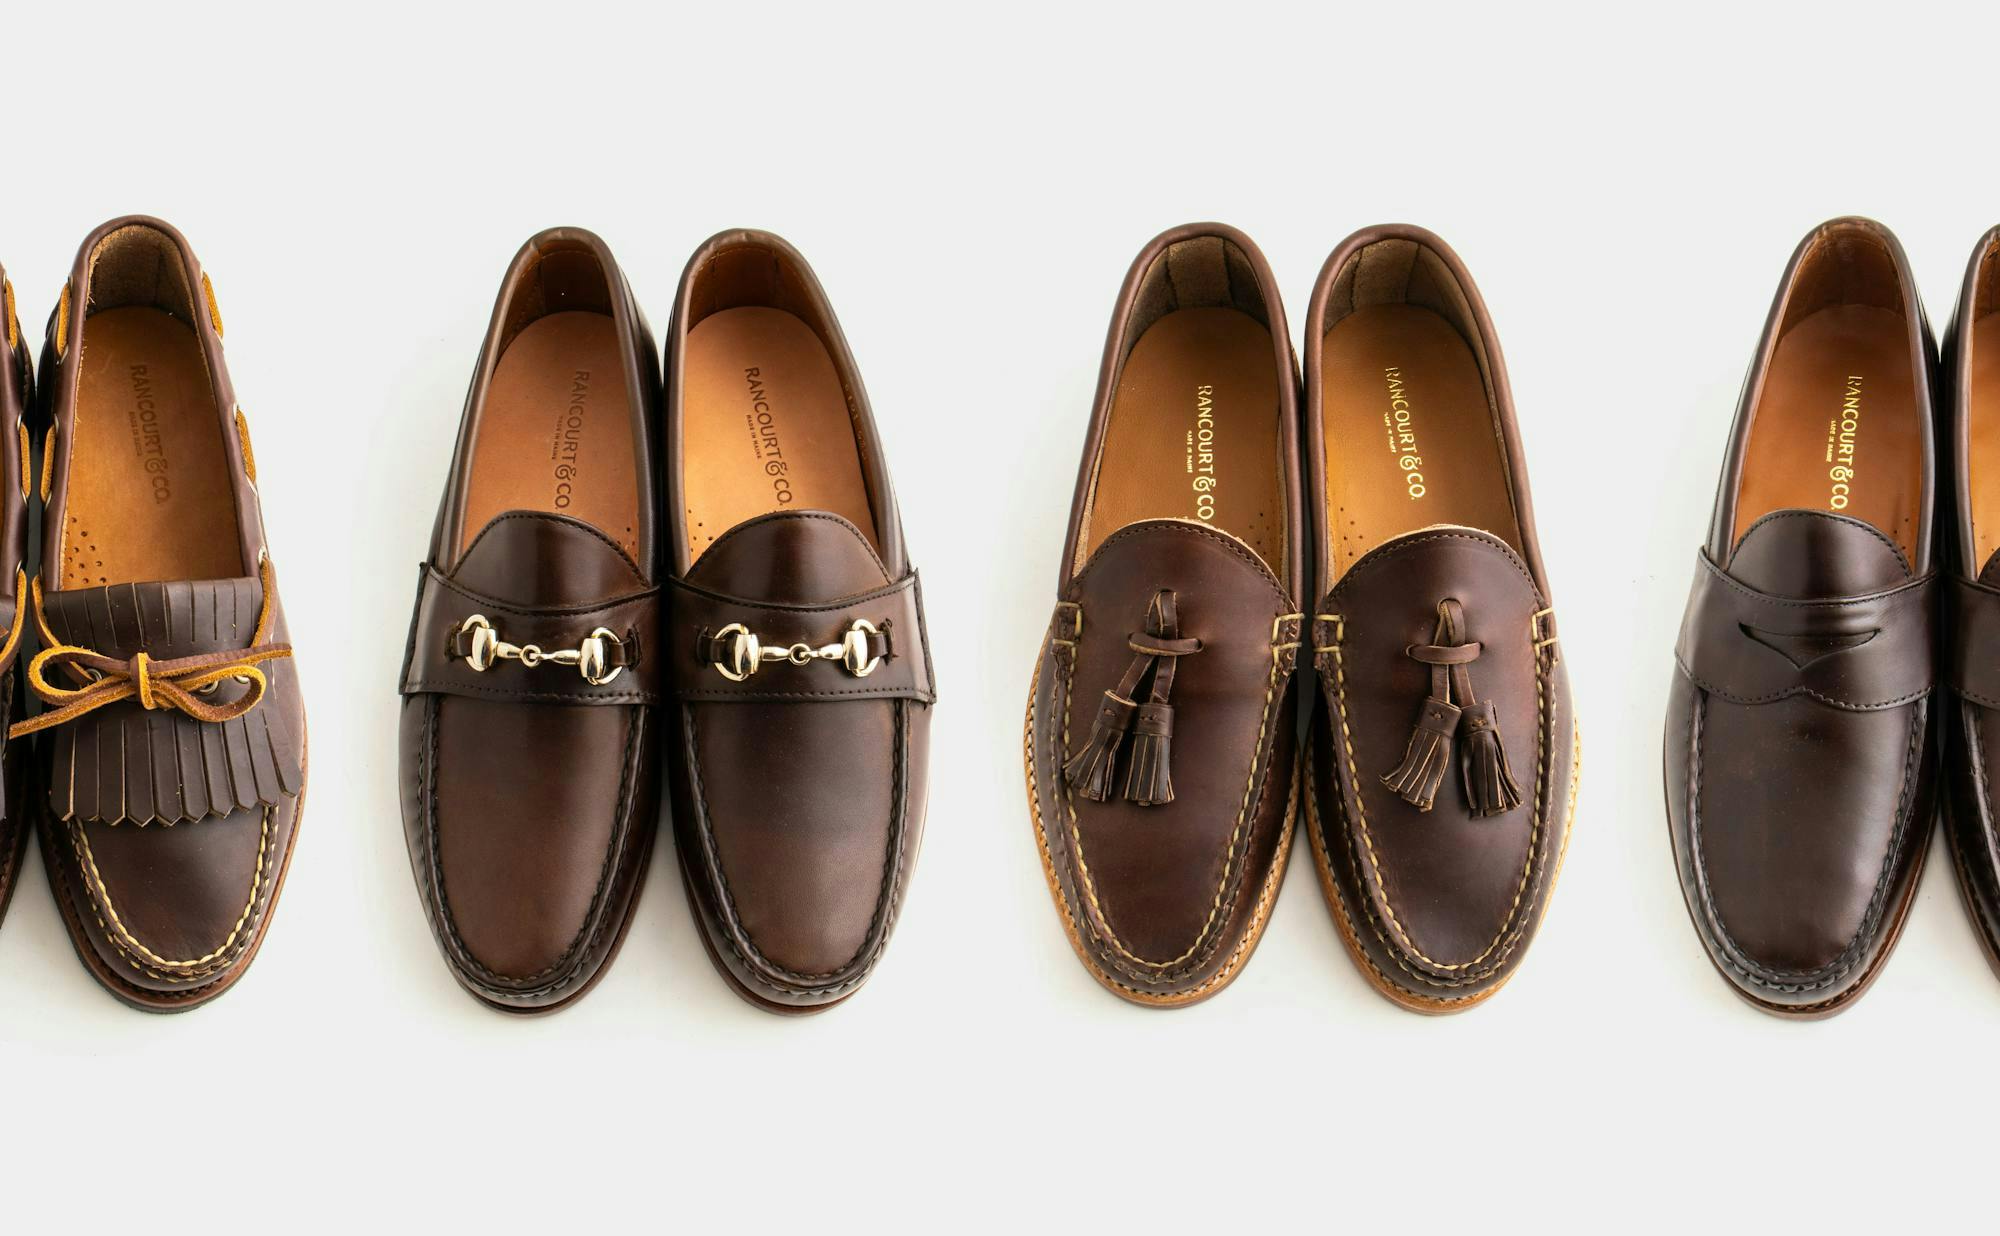 Four pairs of Rancourt loafers in brown calfskin.